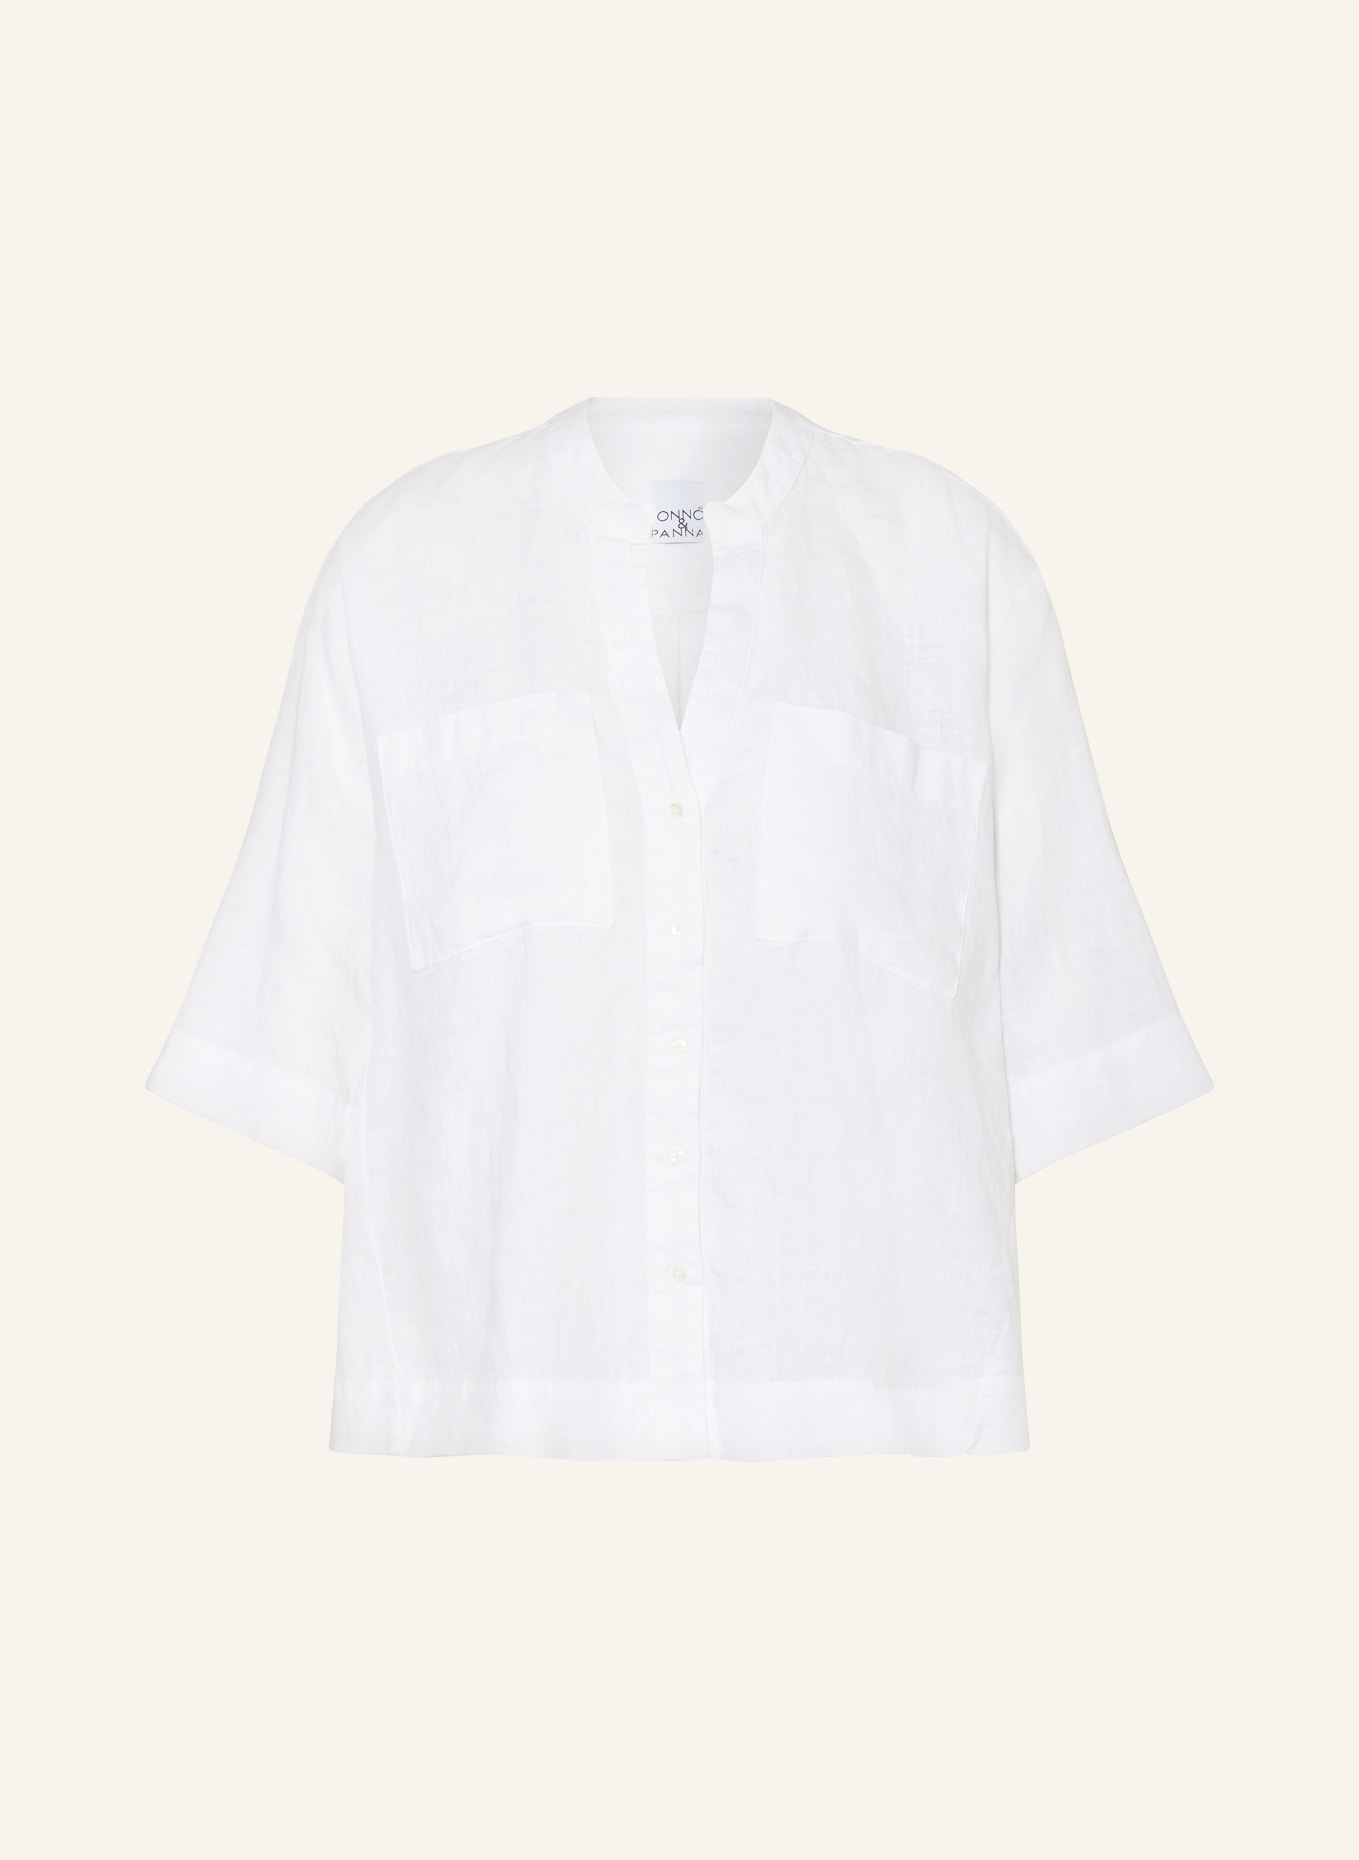 TONNO & PANNA Linen blouse with 3/4 sleeves, Color: WHITE (Image 1)